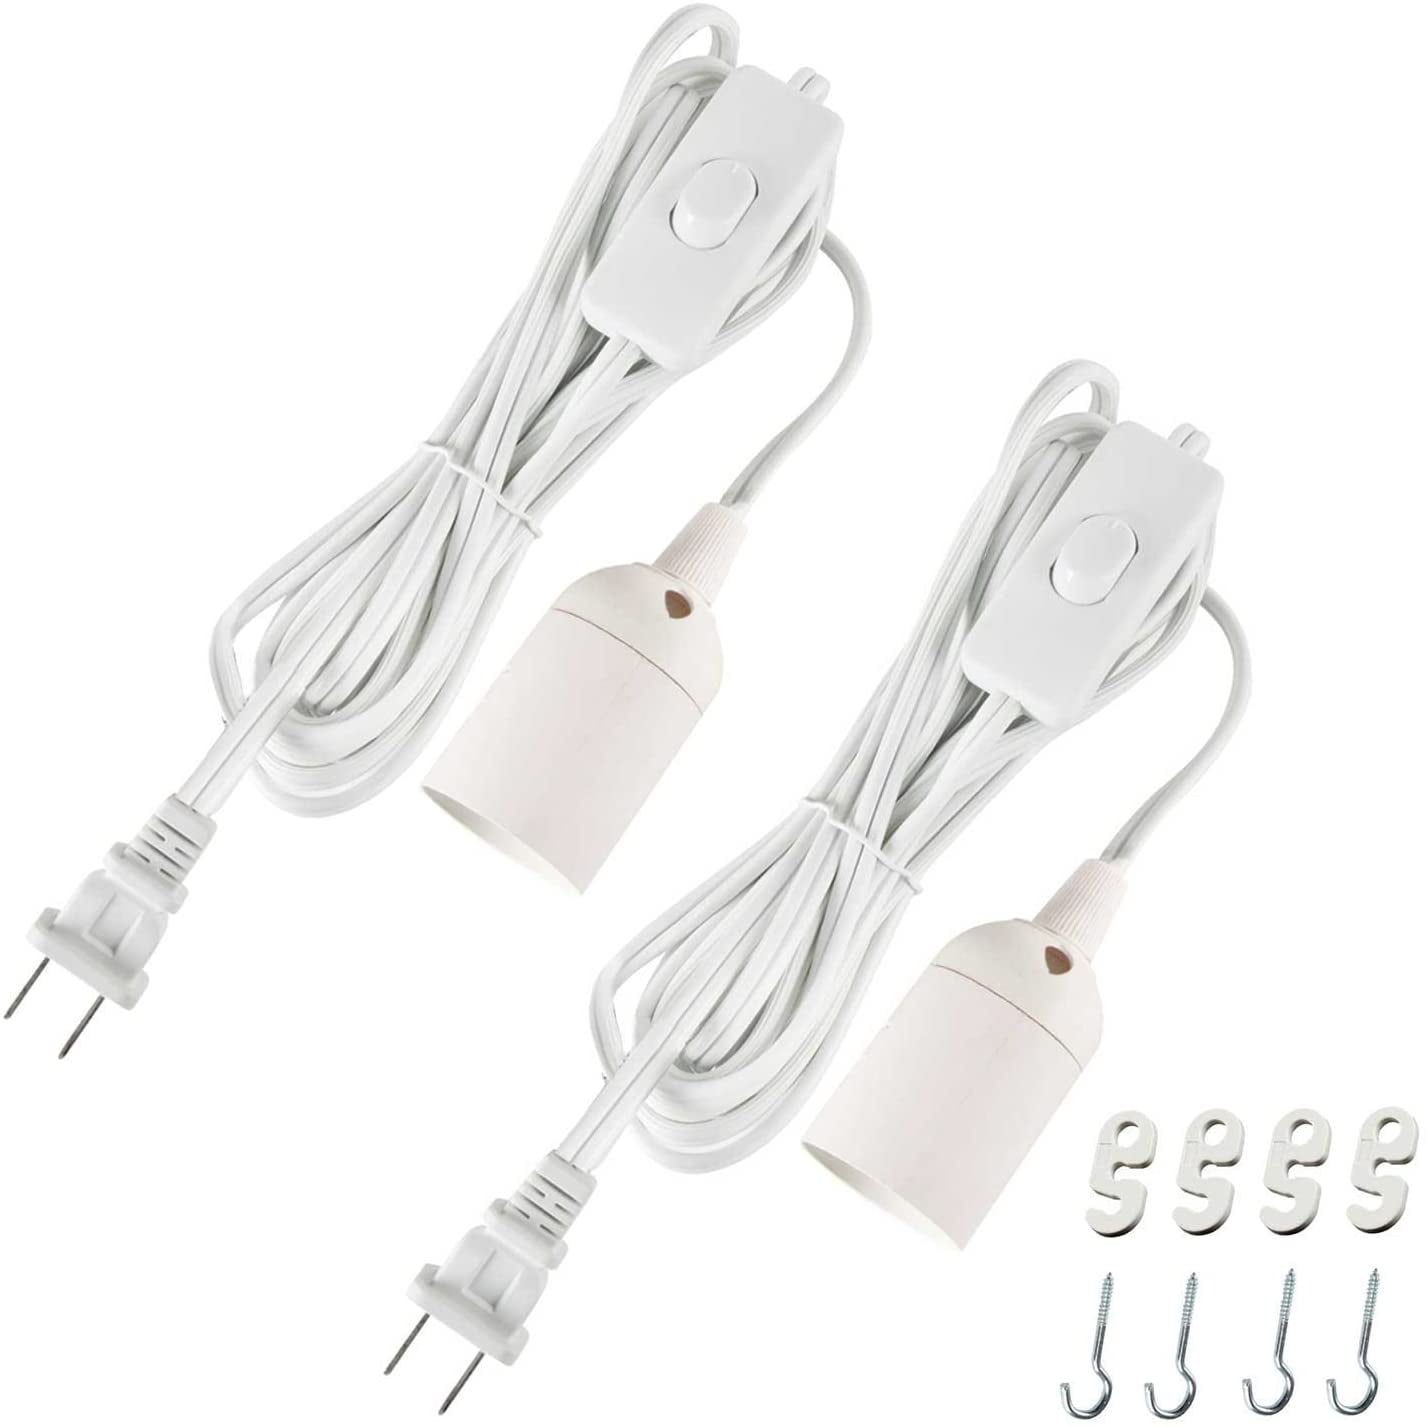 JACKYLED Extension Hanging Lantern Cord Cable UL 1-pack 12Ft 360W with E26 E27 Socket Gear Switch 2-Prong US AC Power Plugs Pendant Lighting Bulb Lamp for Kitchen Bedroom Bathroom Hooks 